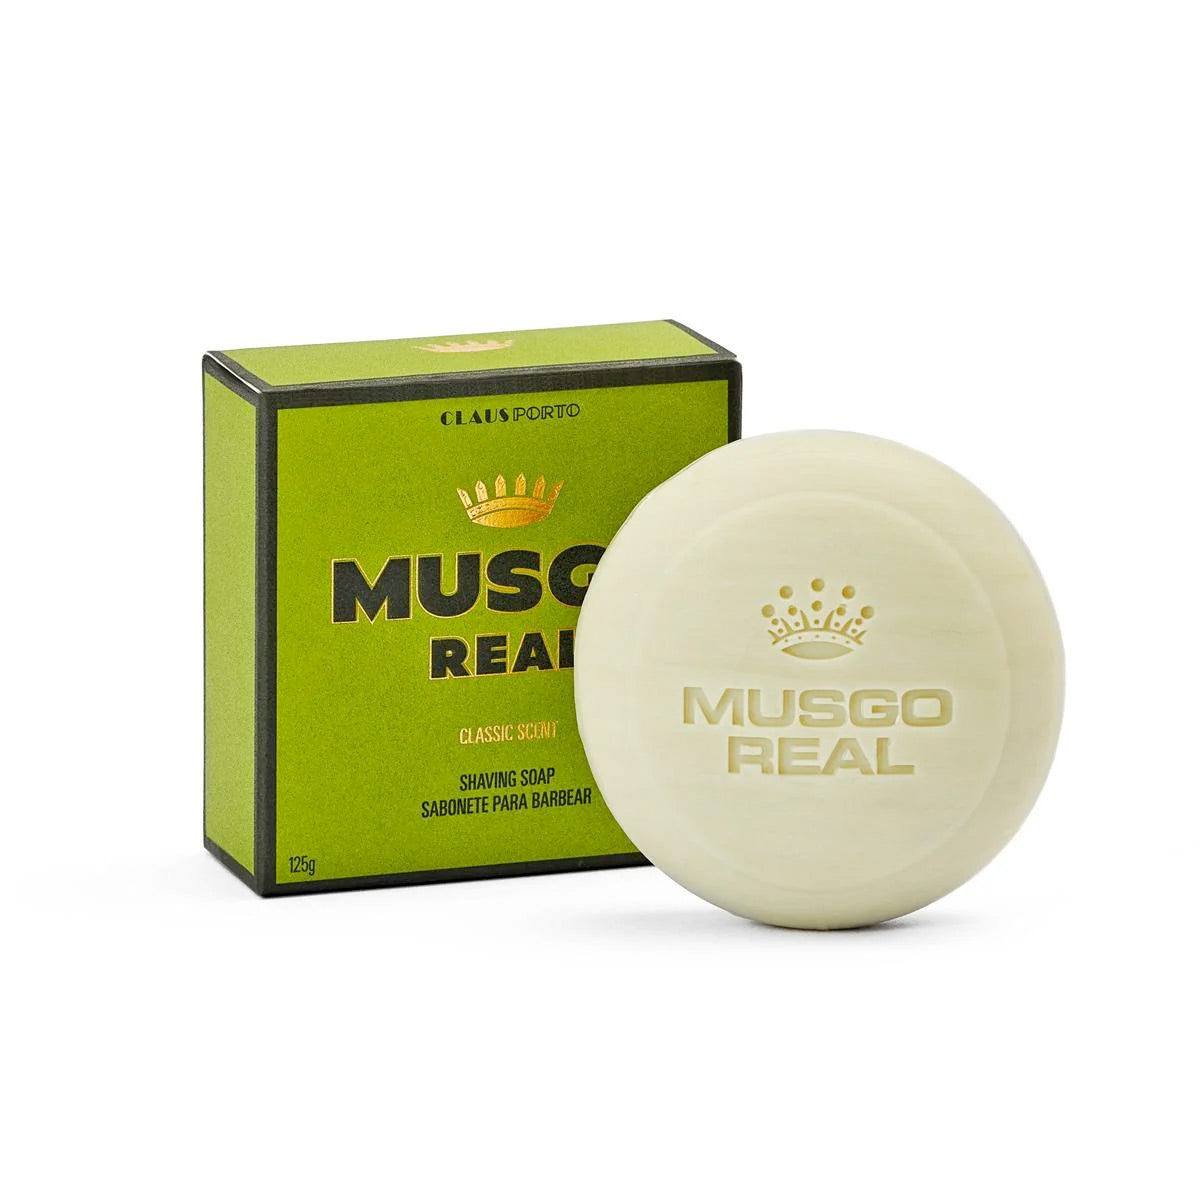 Musgo Real Shaving Soap Classic Scent (125g)